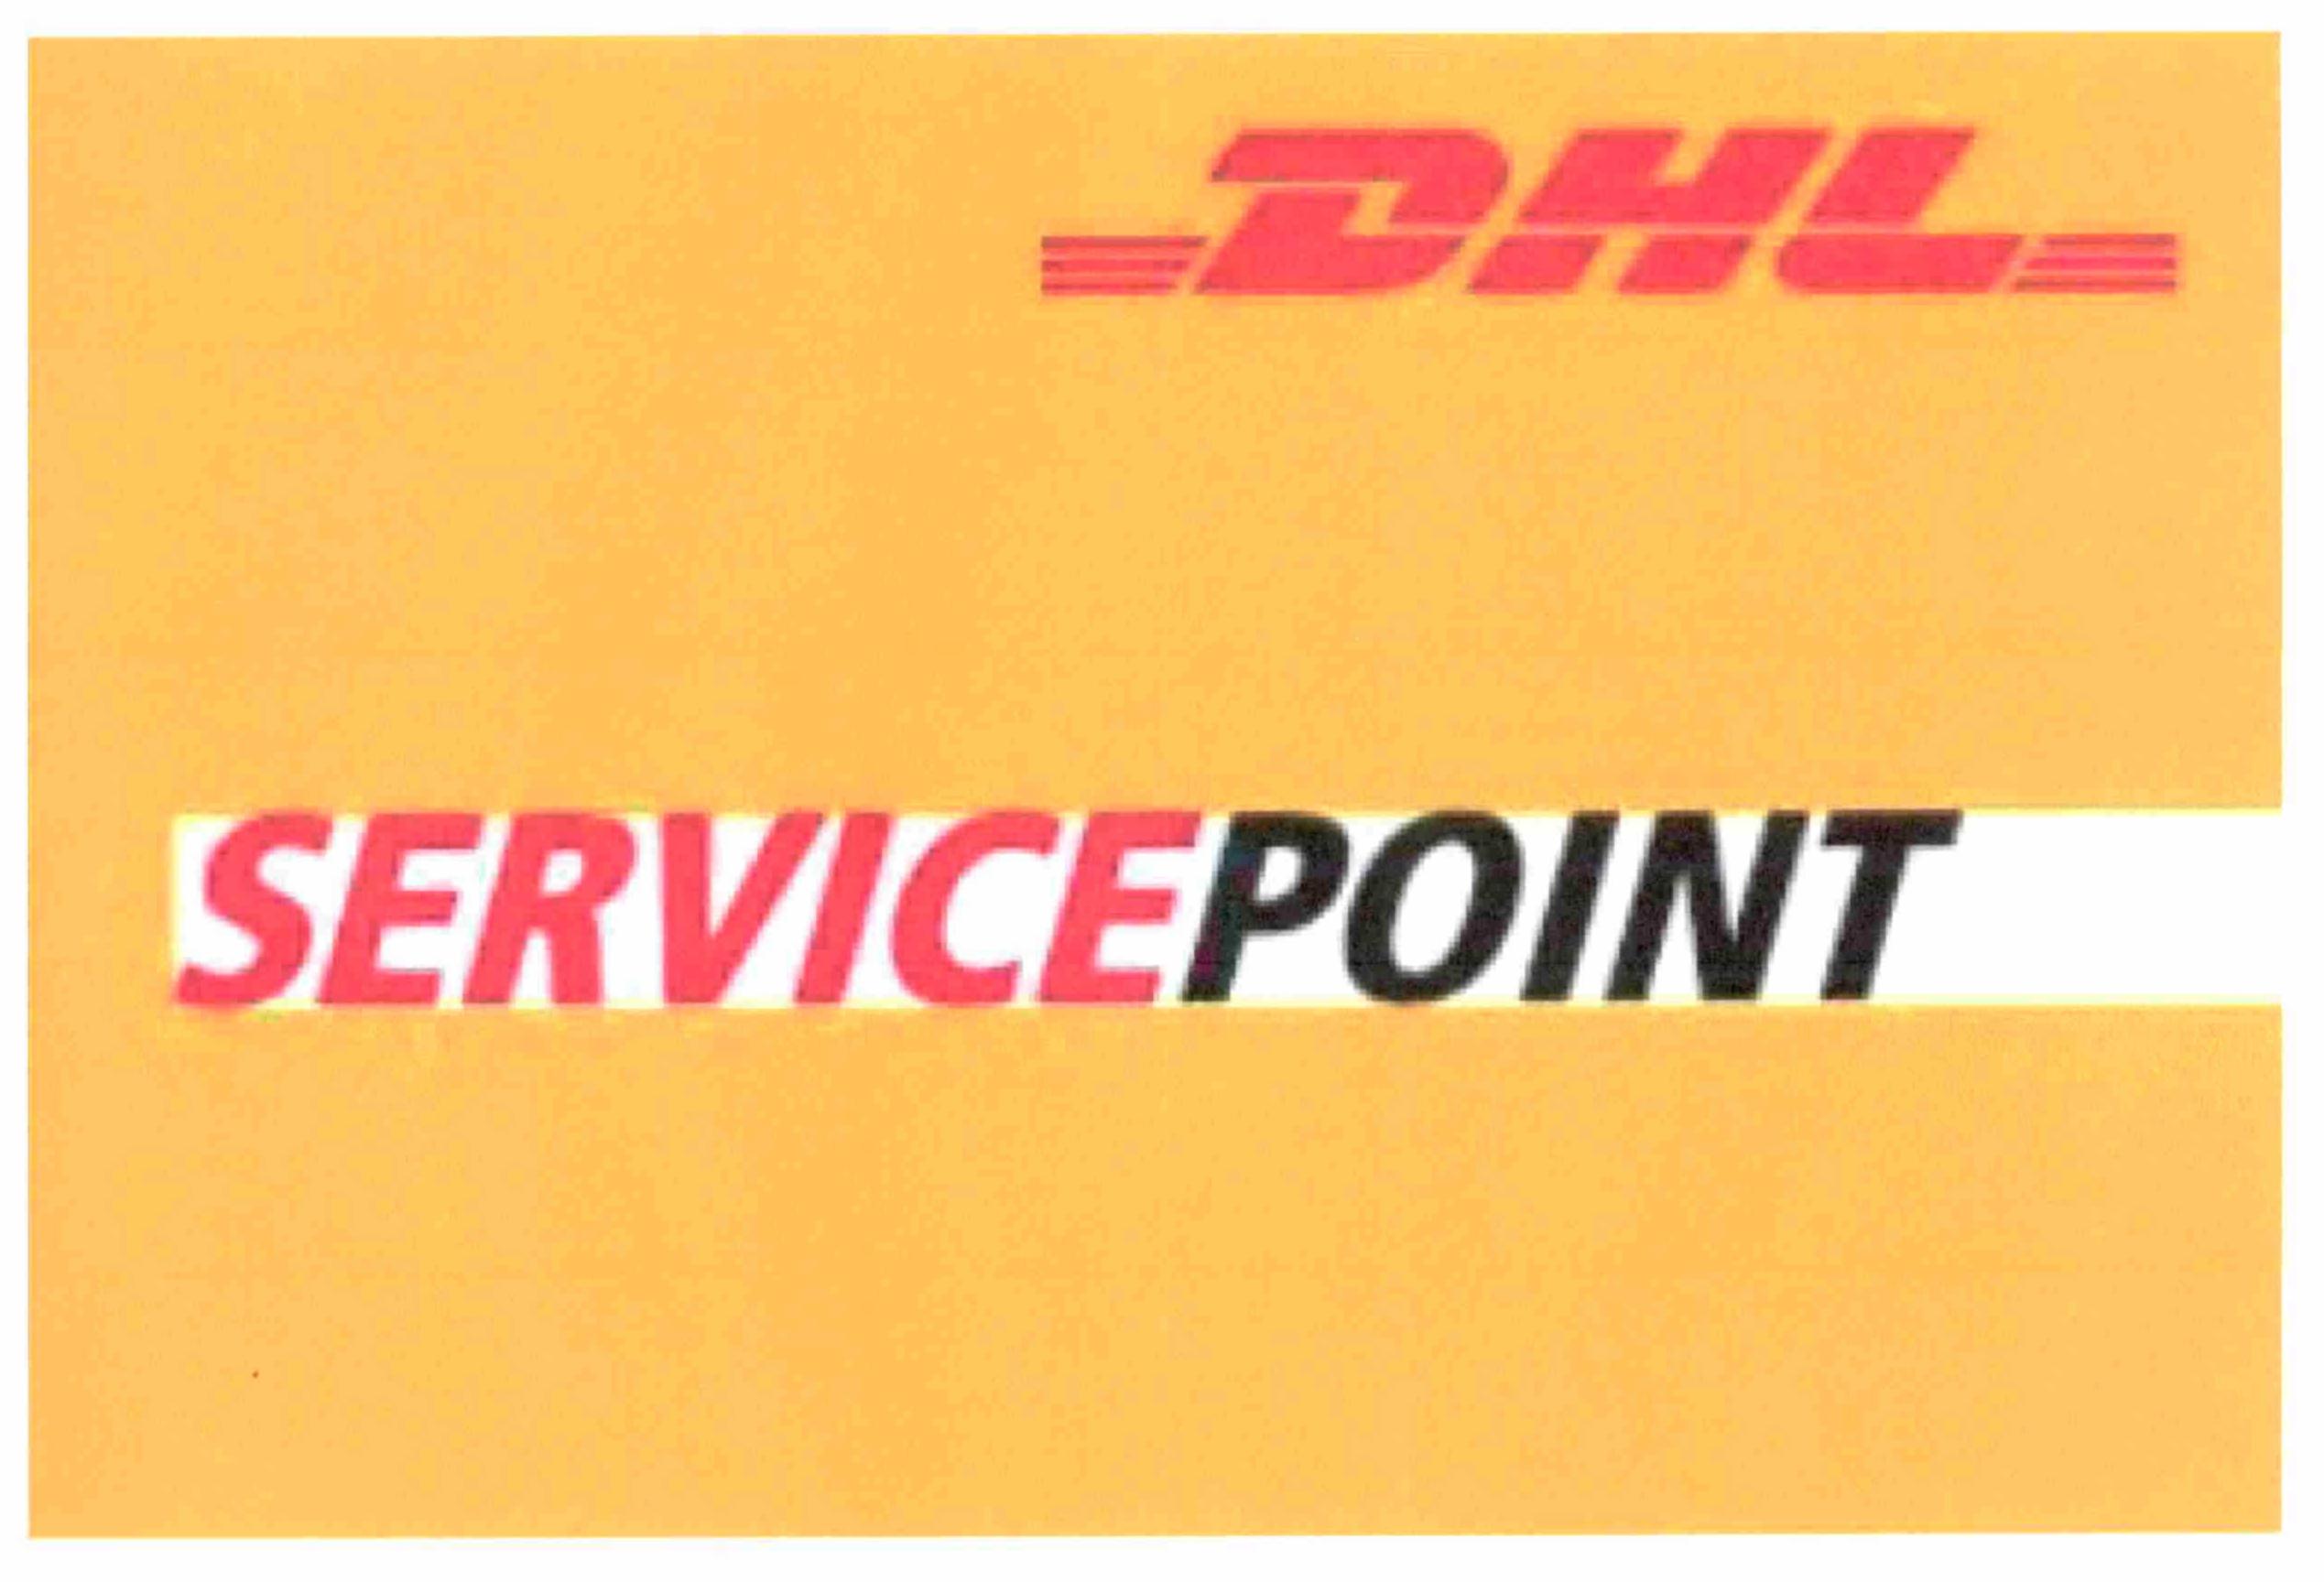  DHL SERVICEPOINT